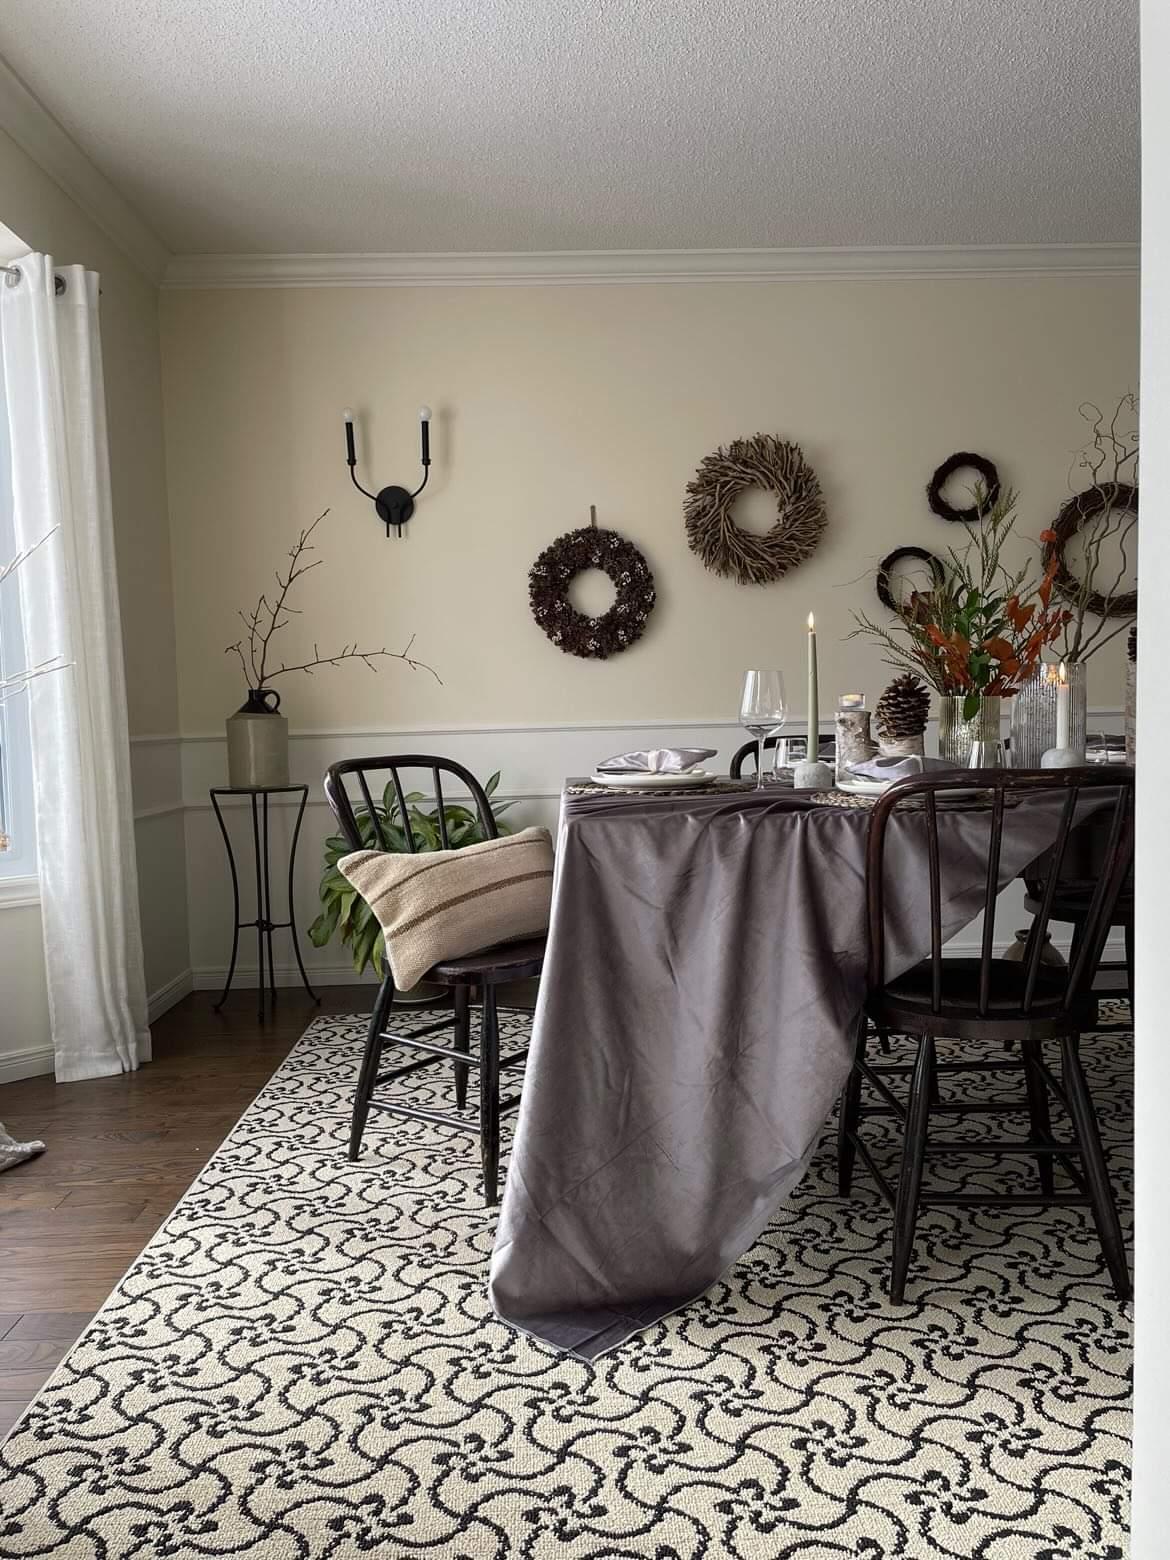 dinning room with patterned rug and table with slate velvet table cloth draped table is fully set